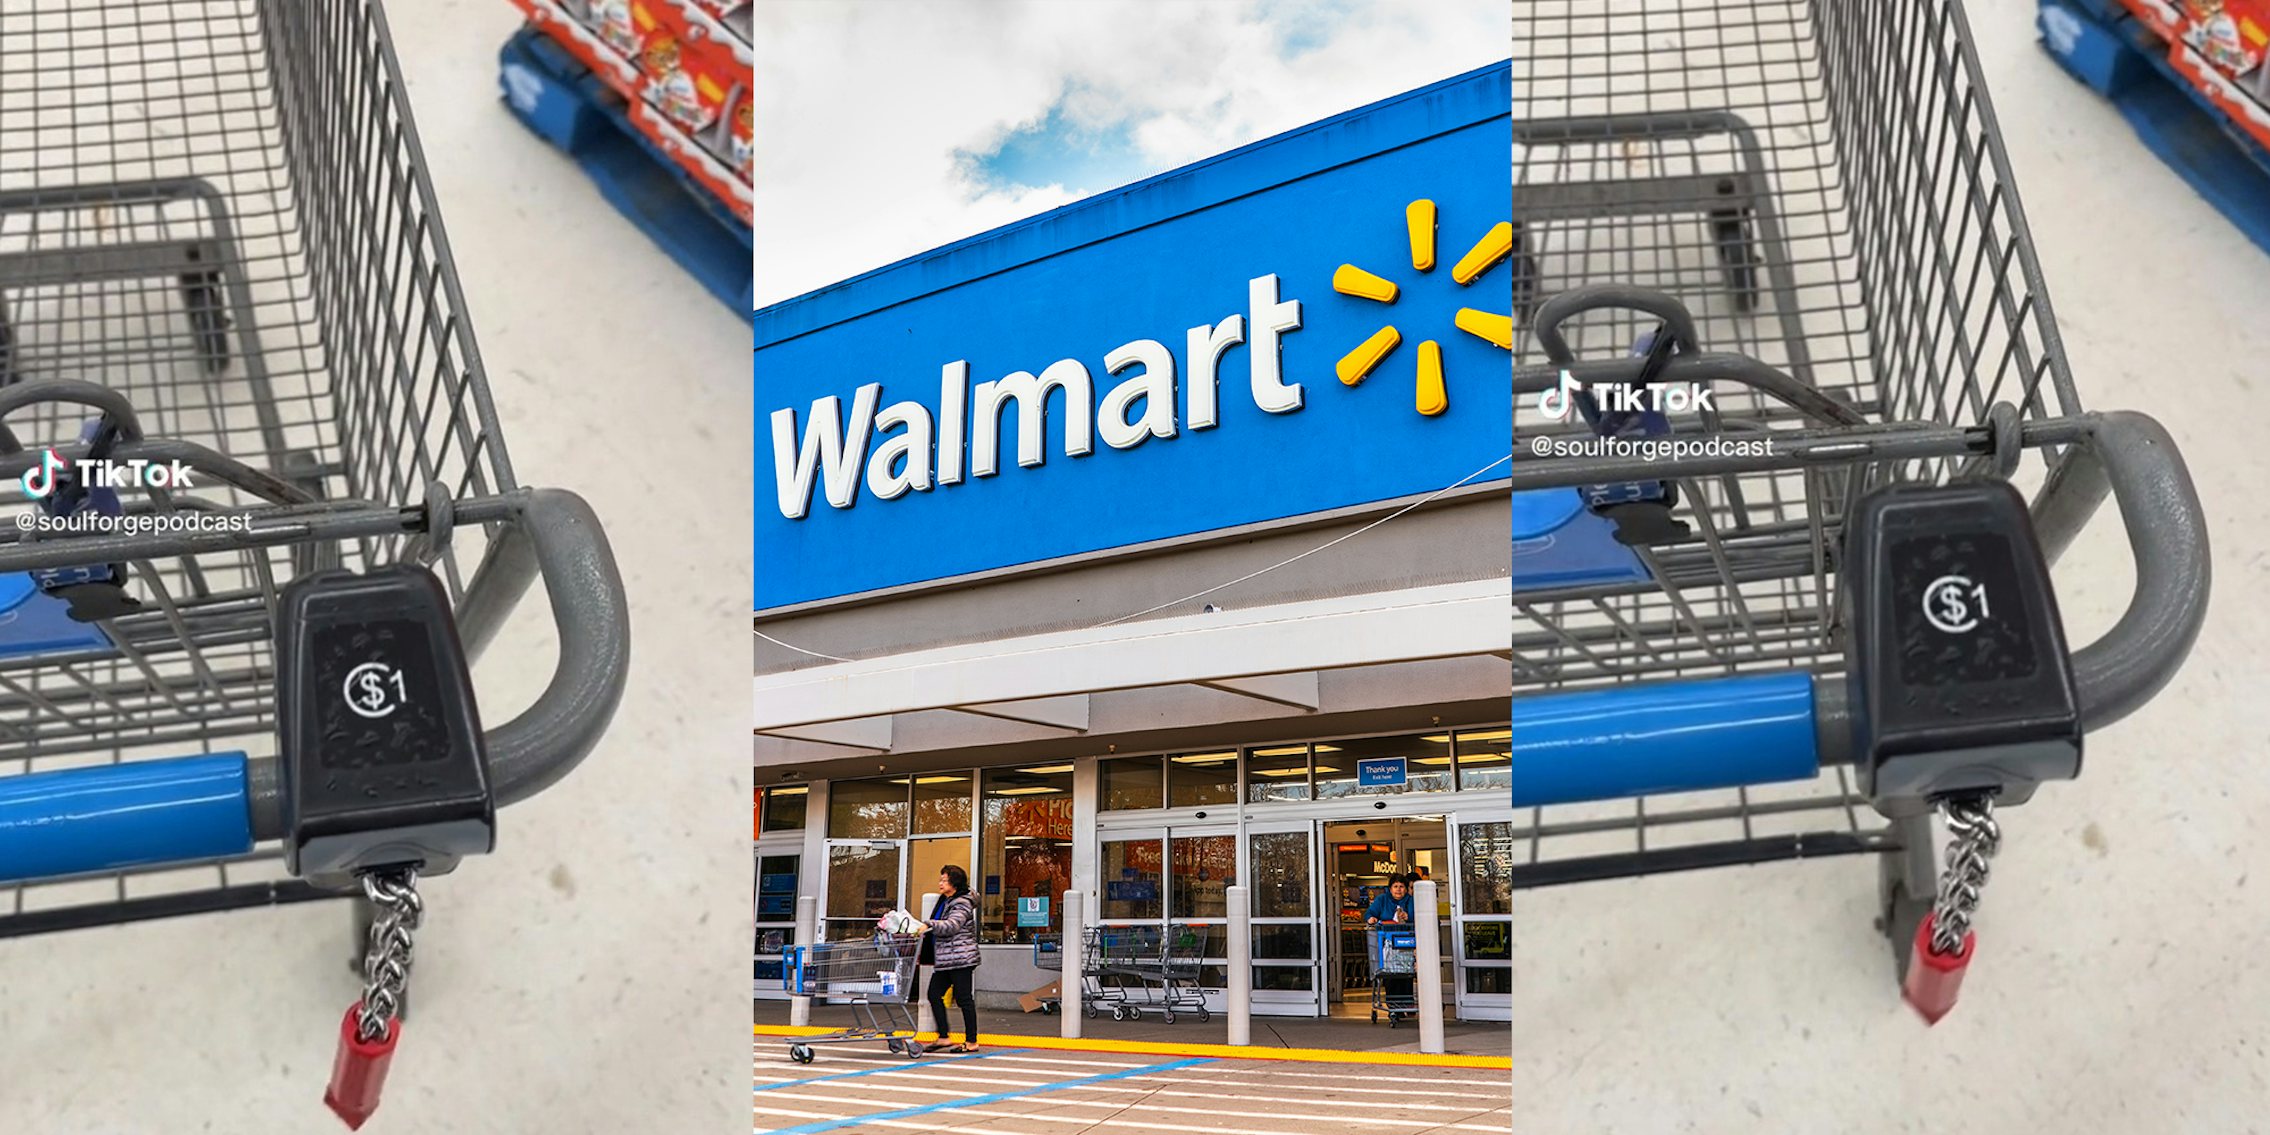 Customer claims Walmart will start charging $1 to use their carts